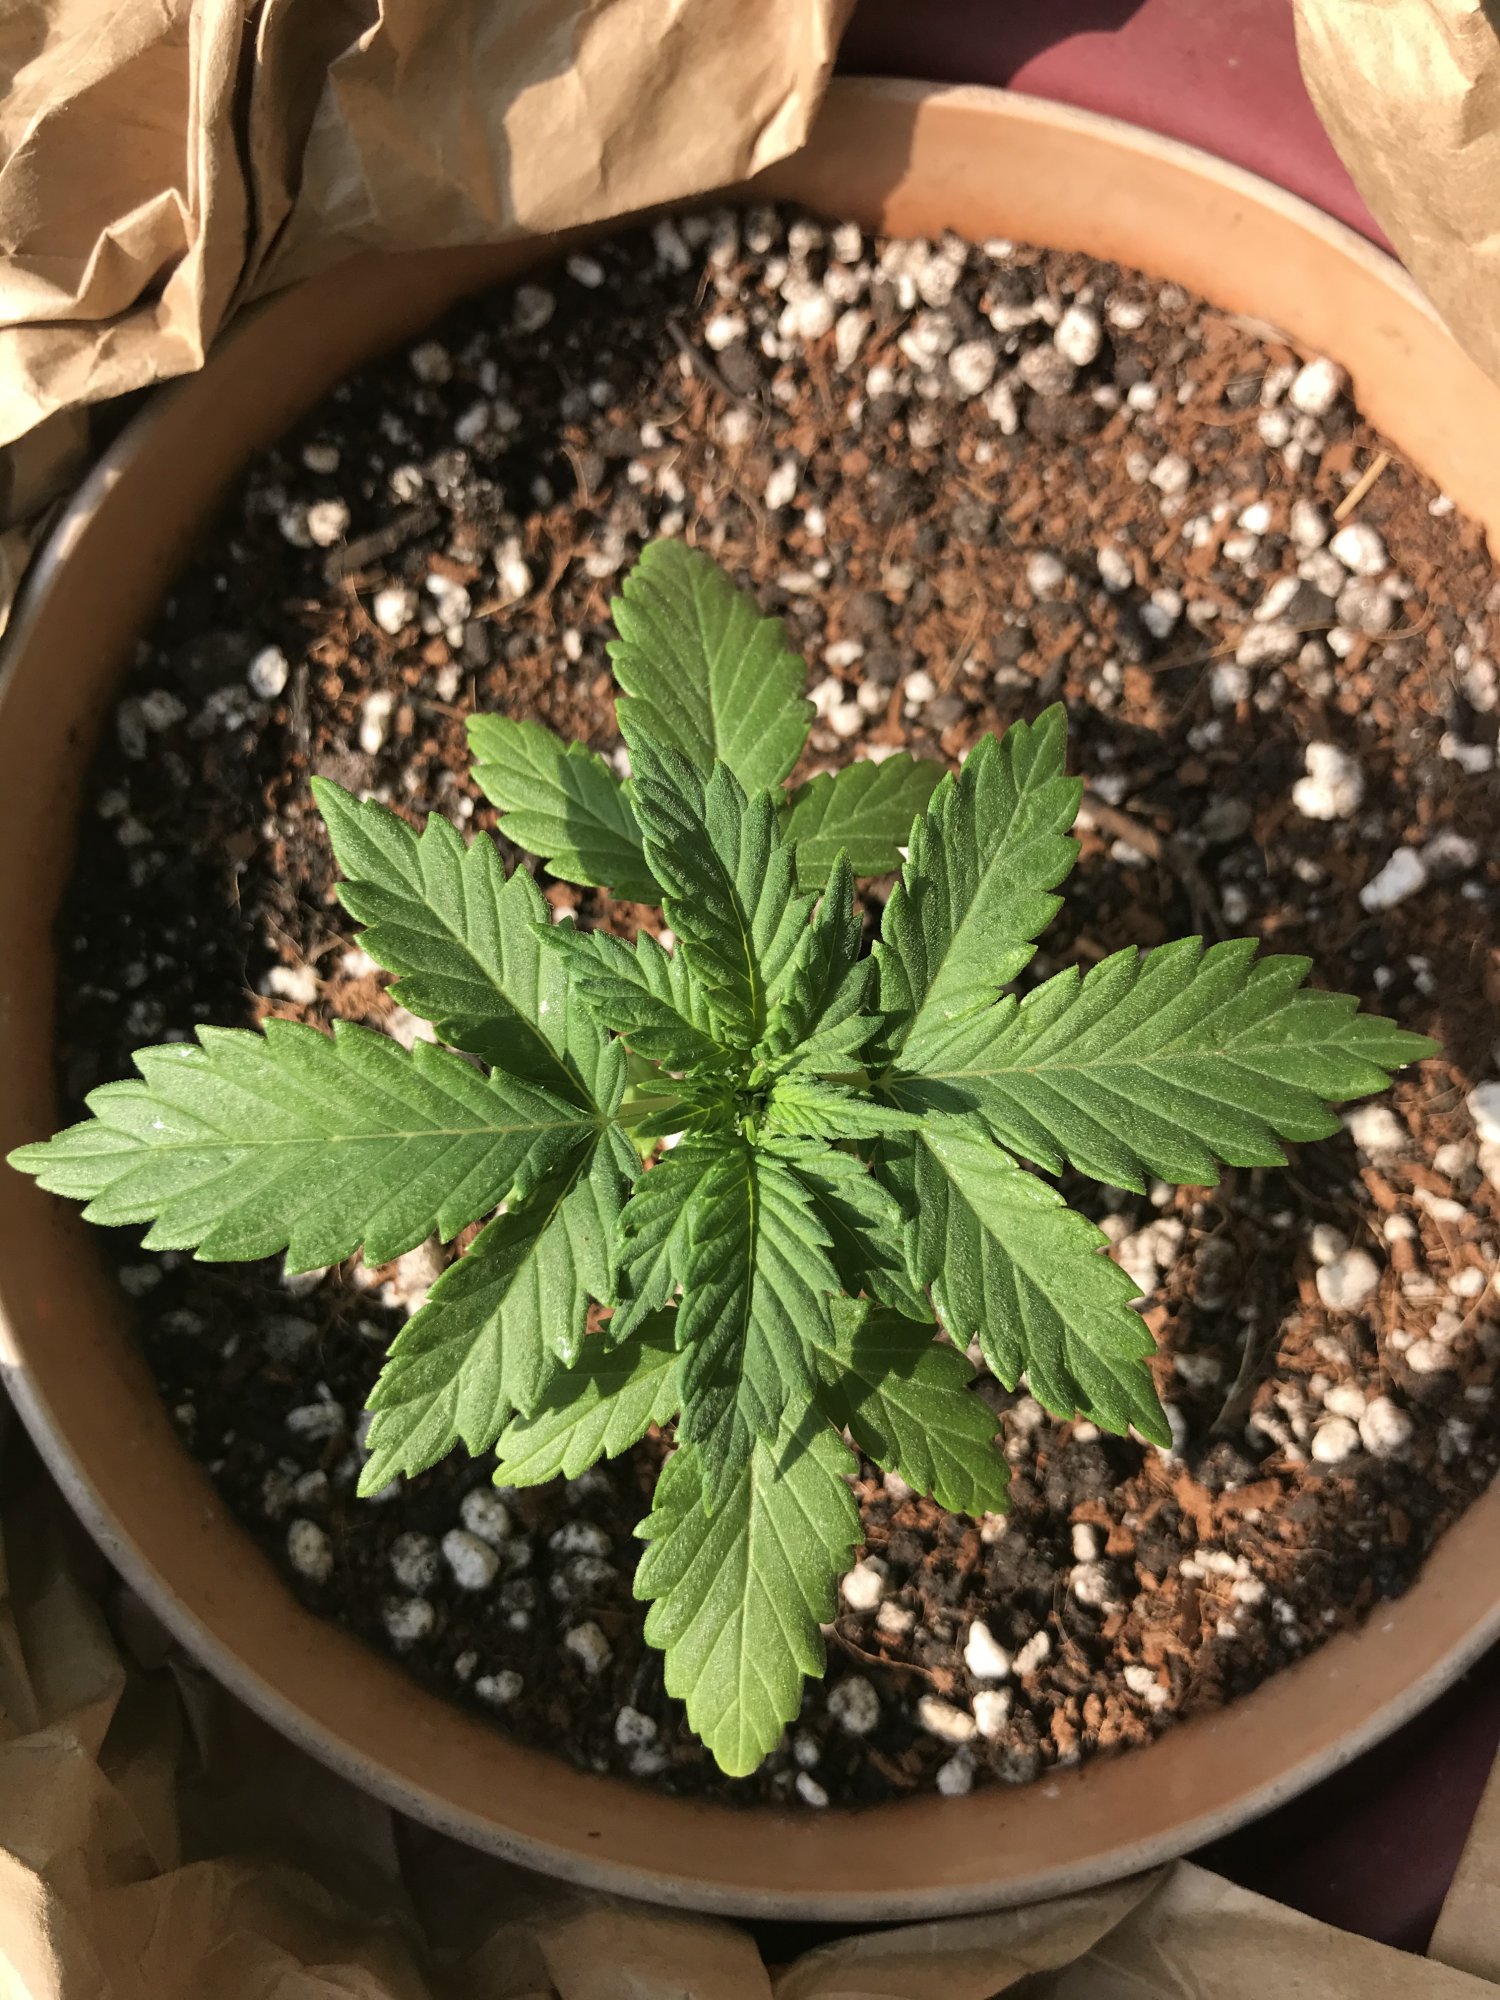 Old leaves are lighter green than new growth after pot transfer first grow 25 says 3